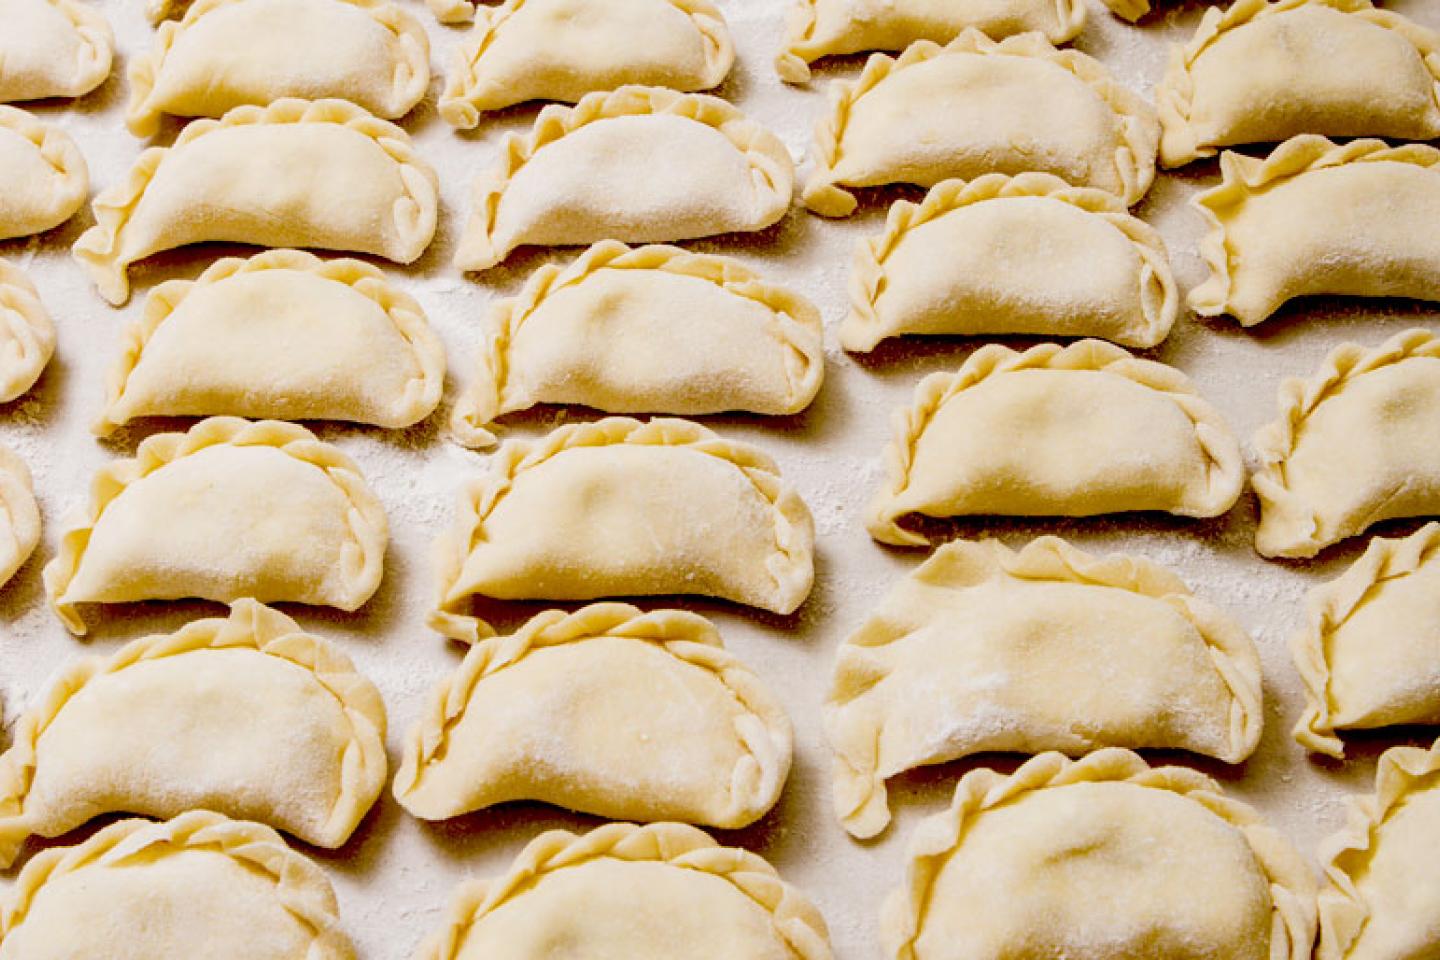 Learn About the Disputed History of Perogies